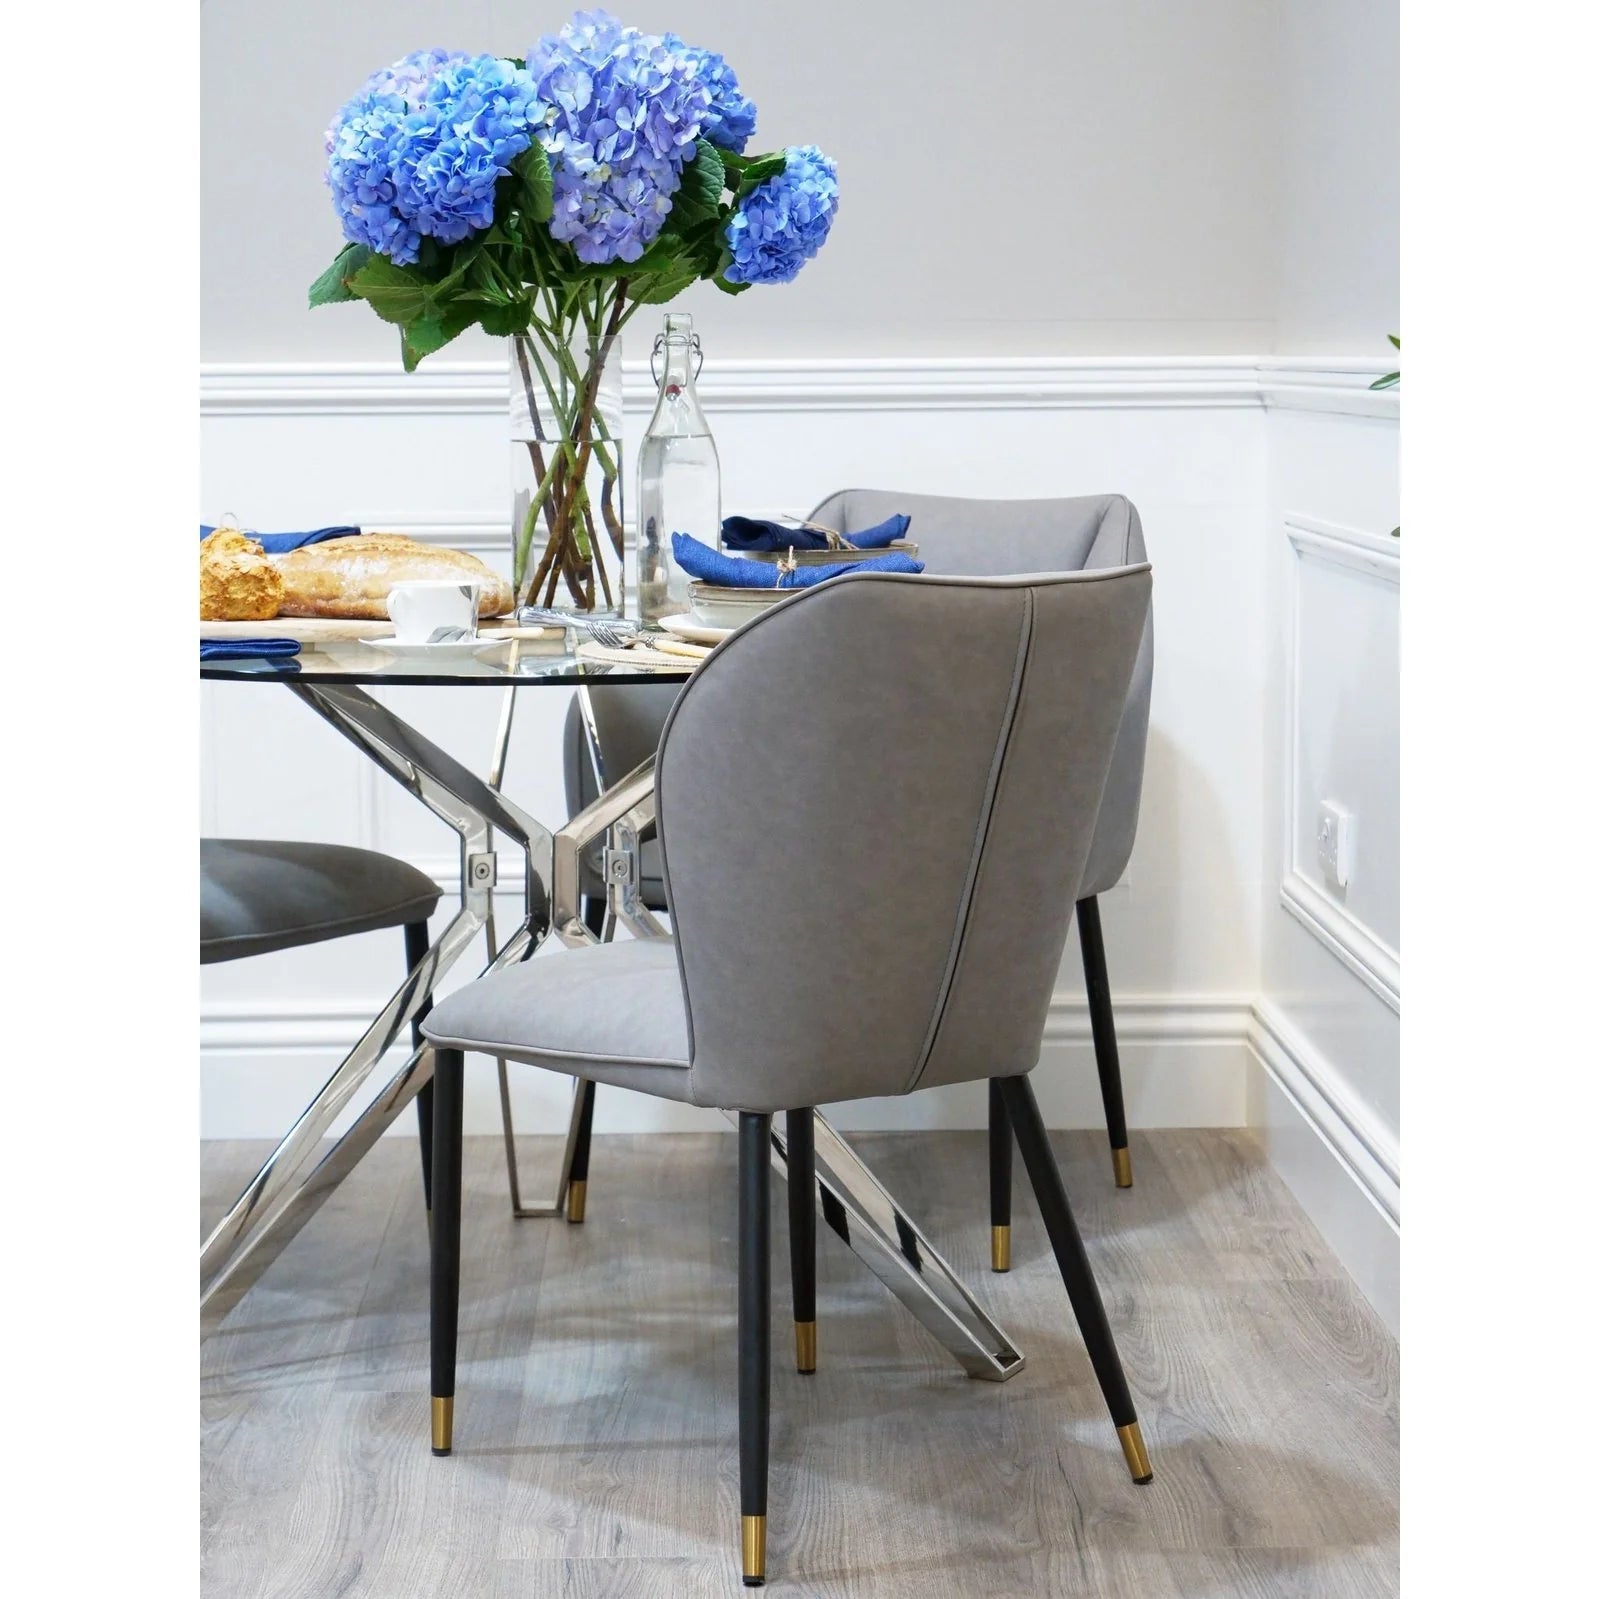 Alice Dining Chair - Grey Leatherette Finish